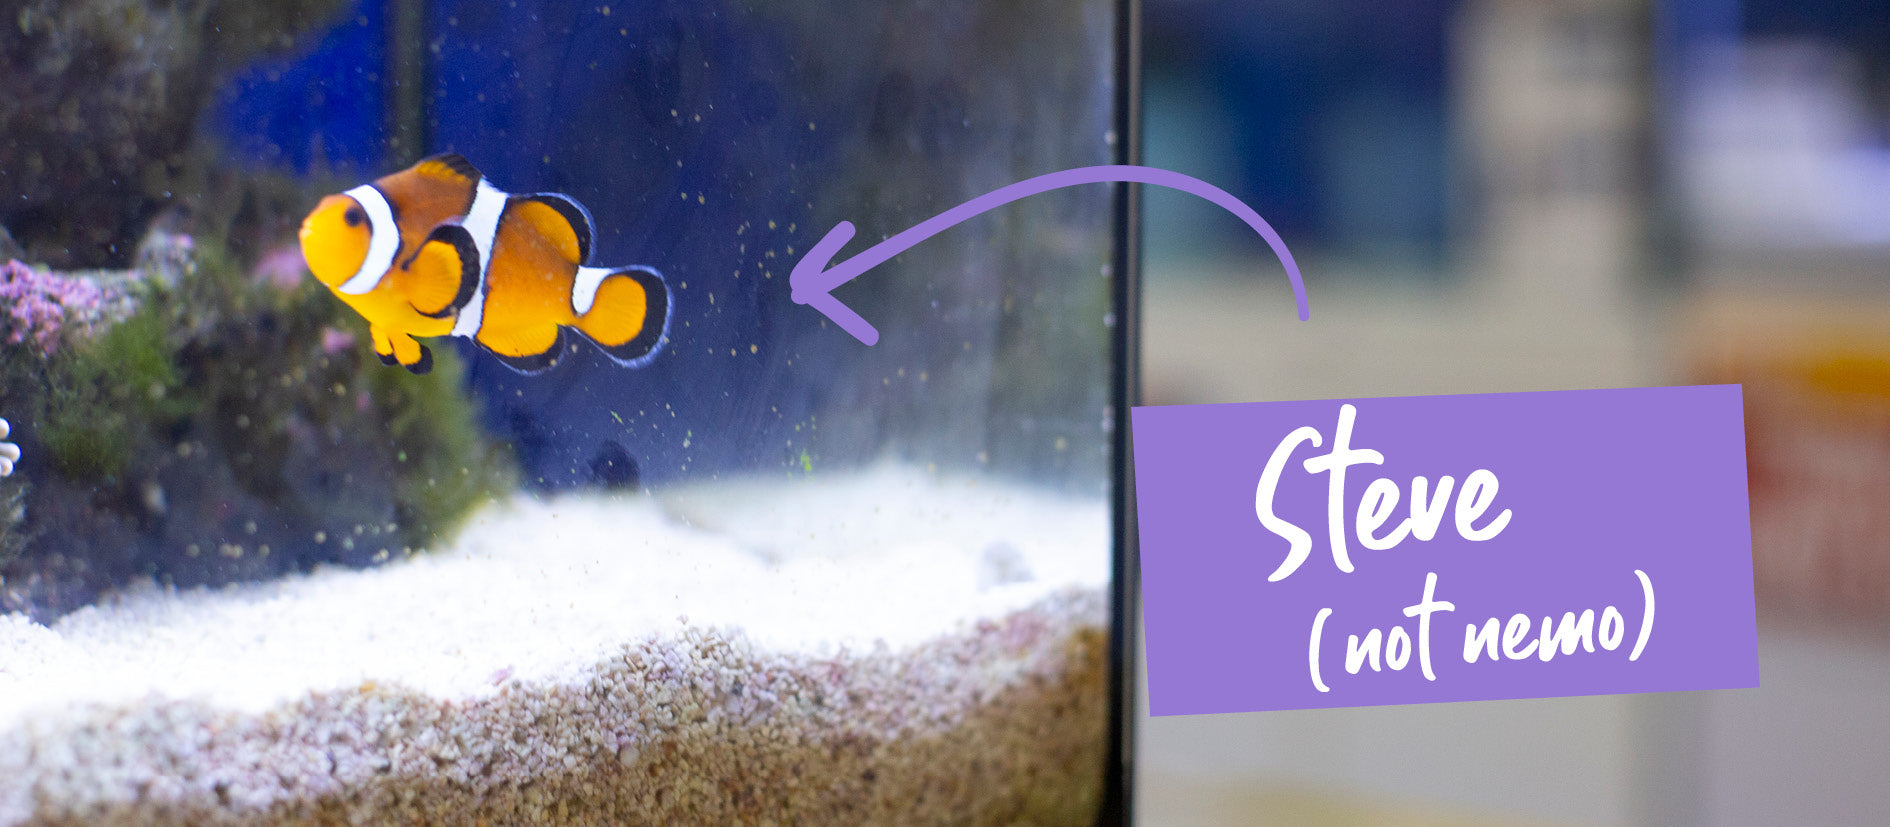 single Clown fish in tank with text saying his name is Steve